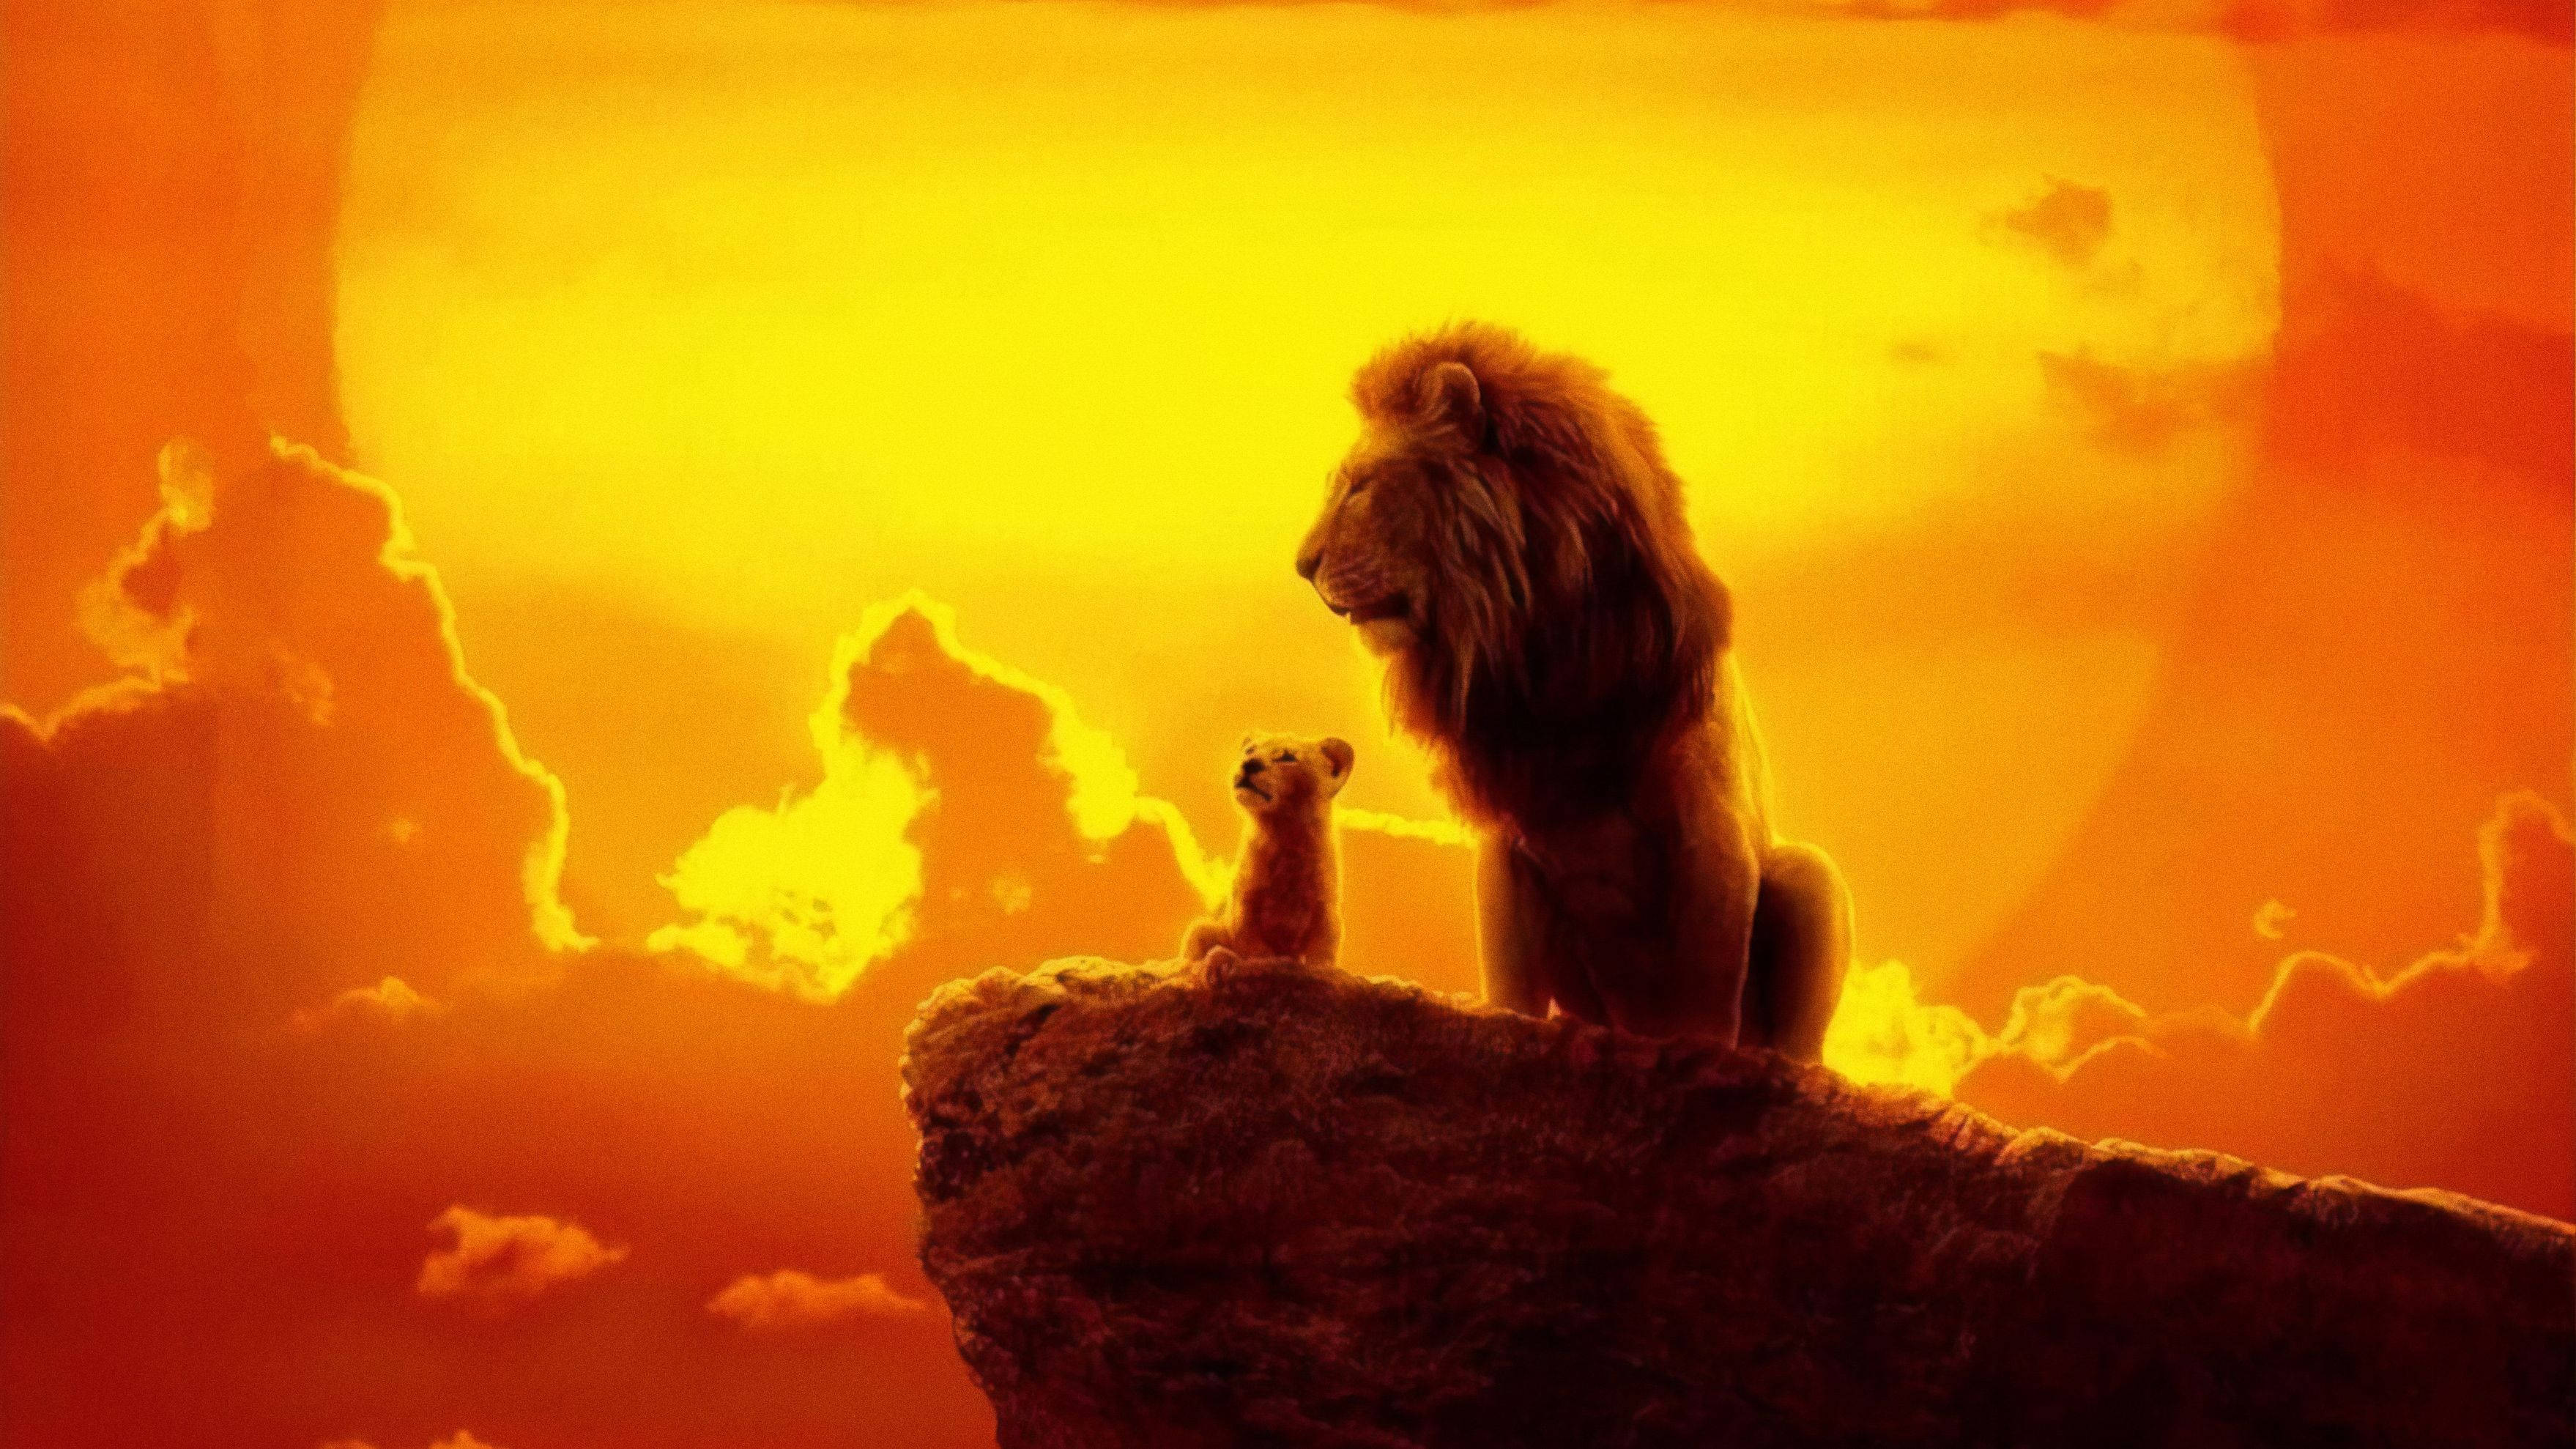 The Lion King 2019 Sunset Hd Background